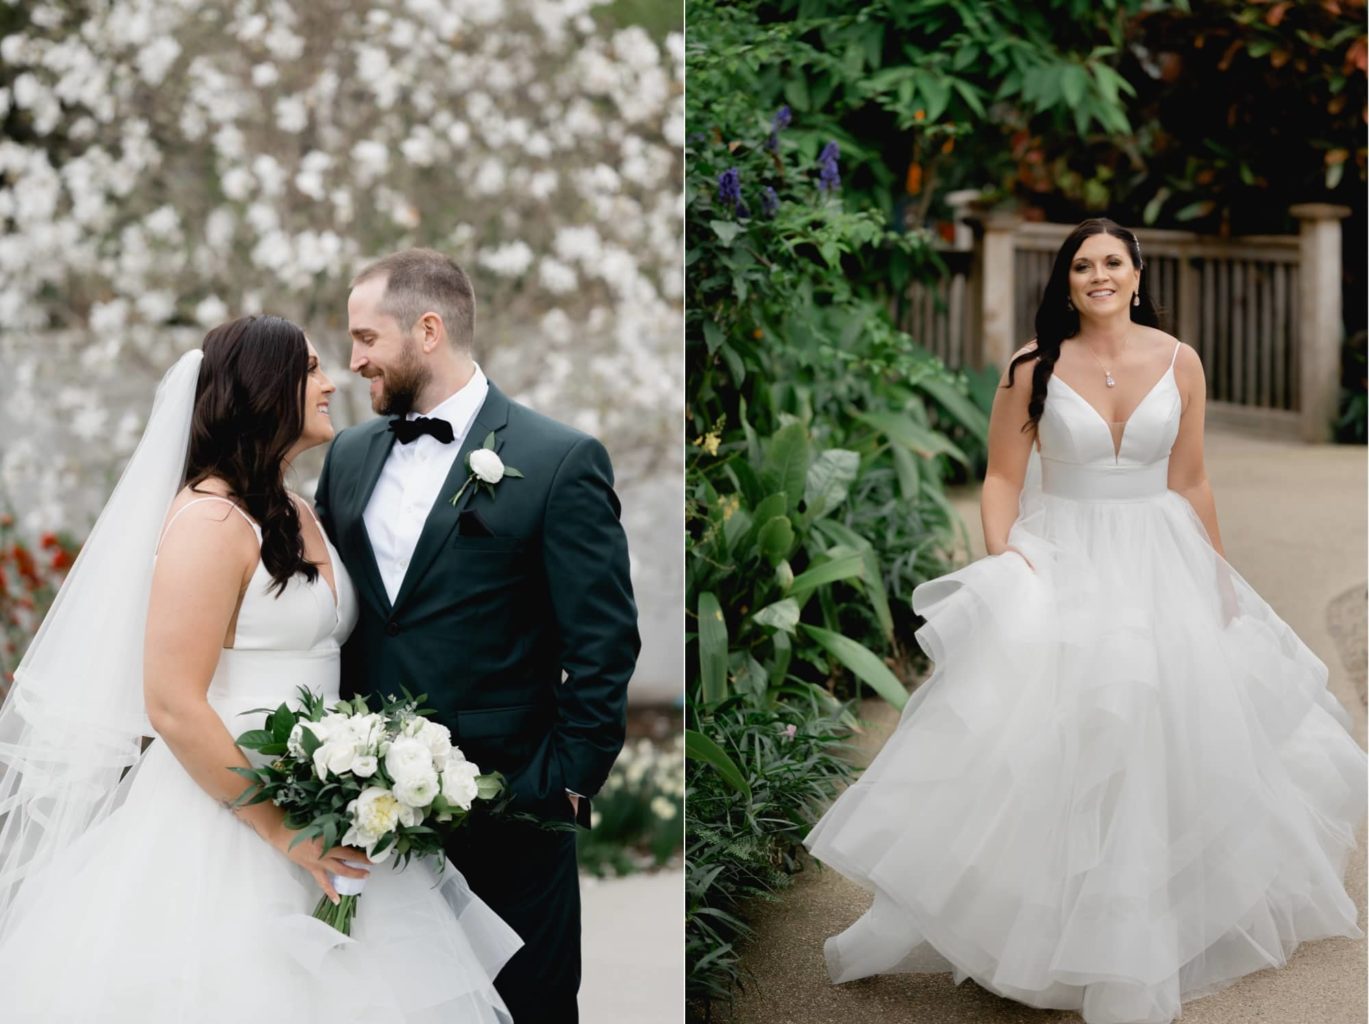 Stunning wedding portraits at the Des Moines botanical Gardens